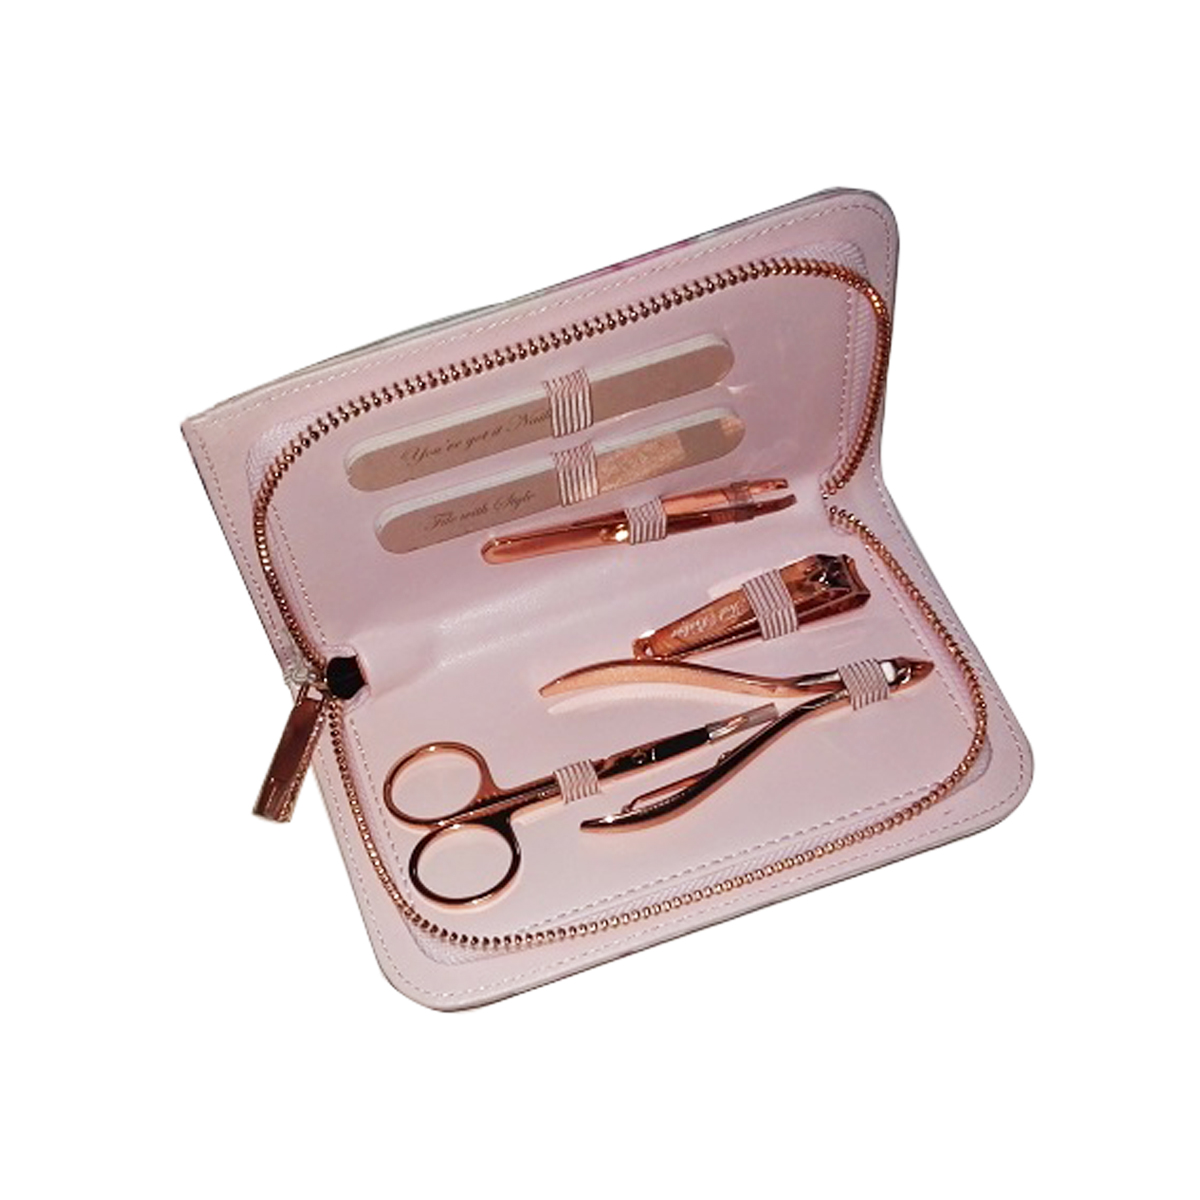 Recycled leather made personal care manicure tool kit nail kit case holder for men and ladies